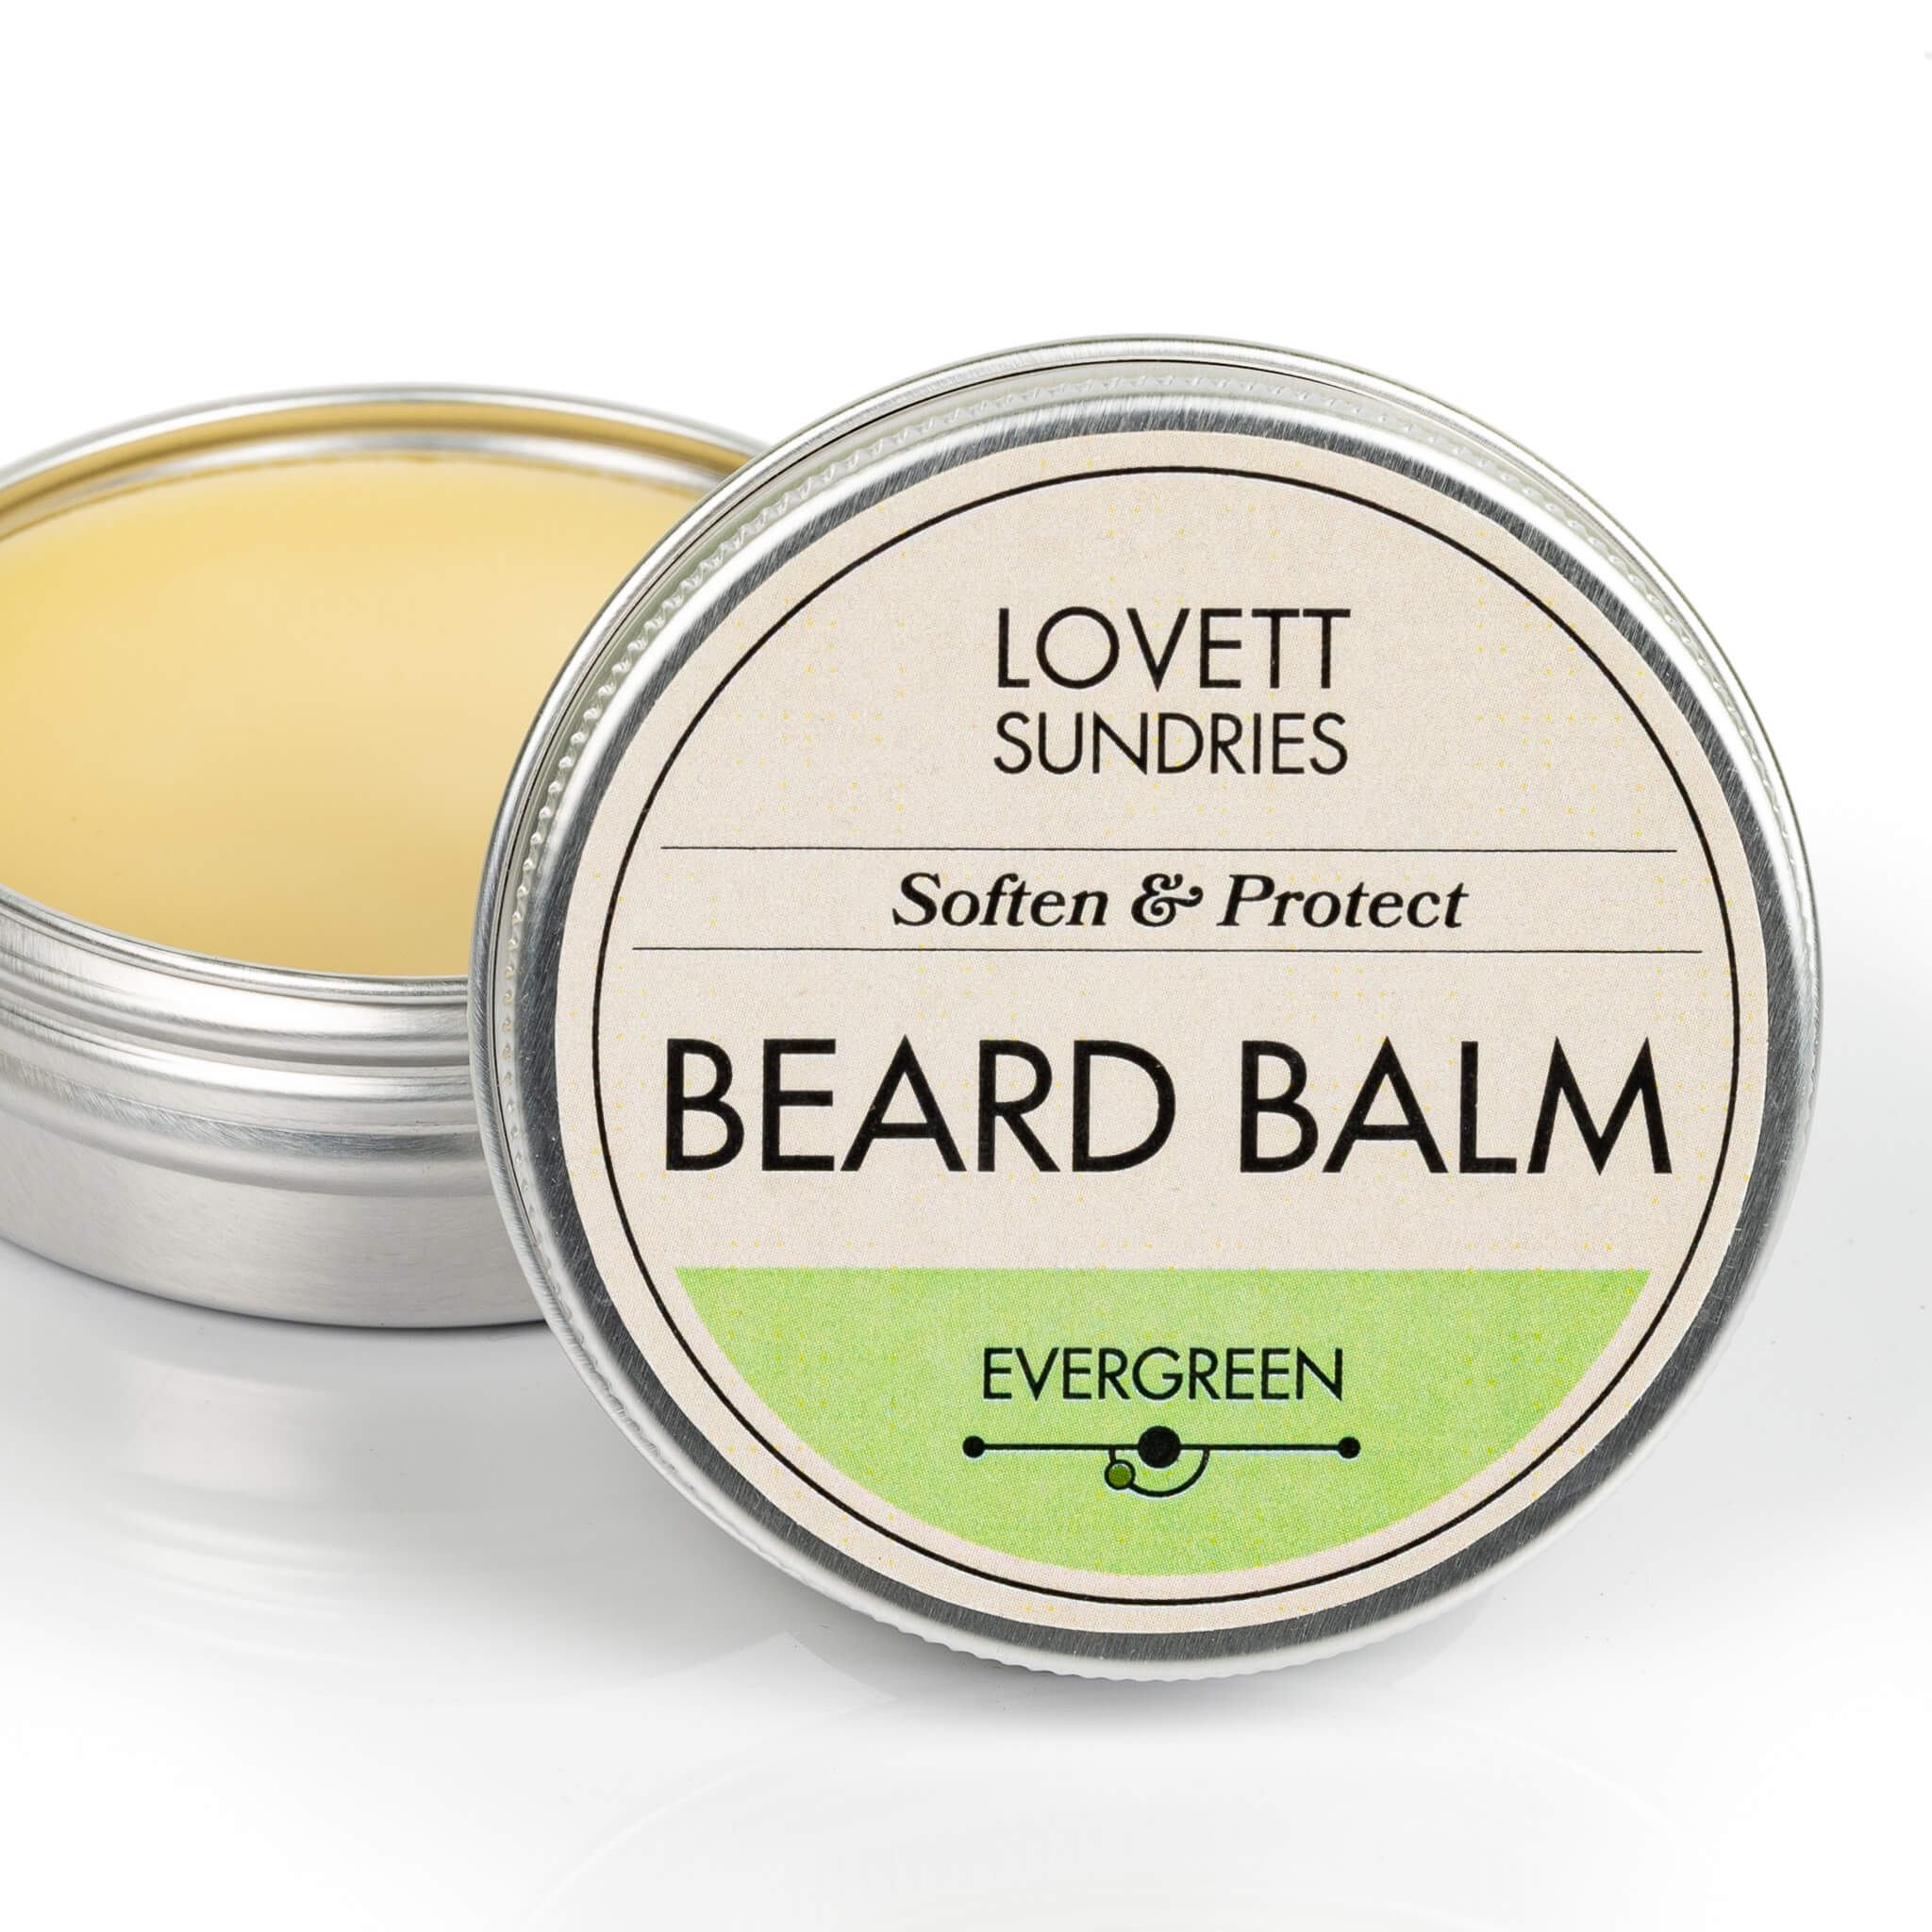 Tin of all natural conditioning and styling evergreen scented beard balm.